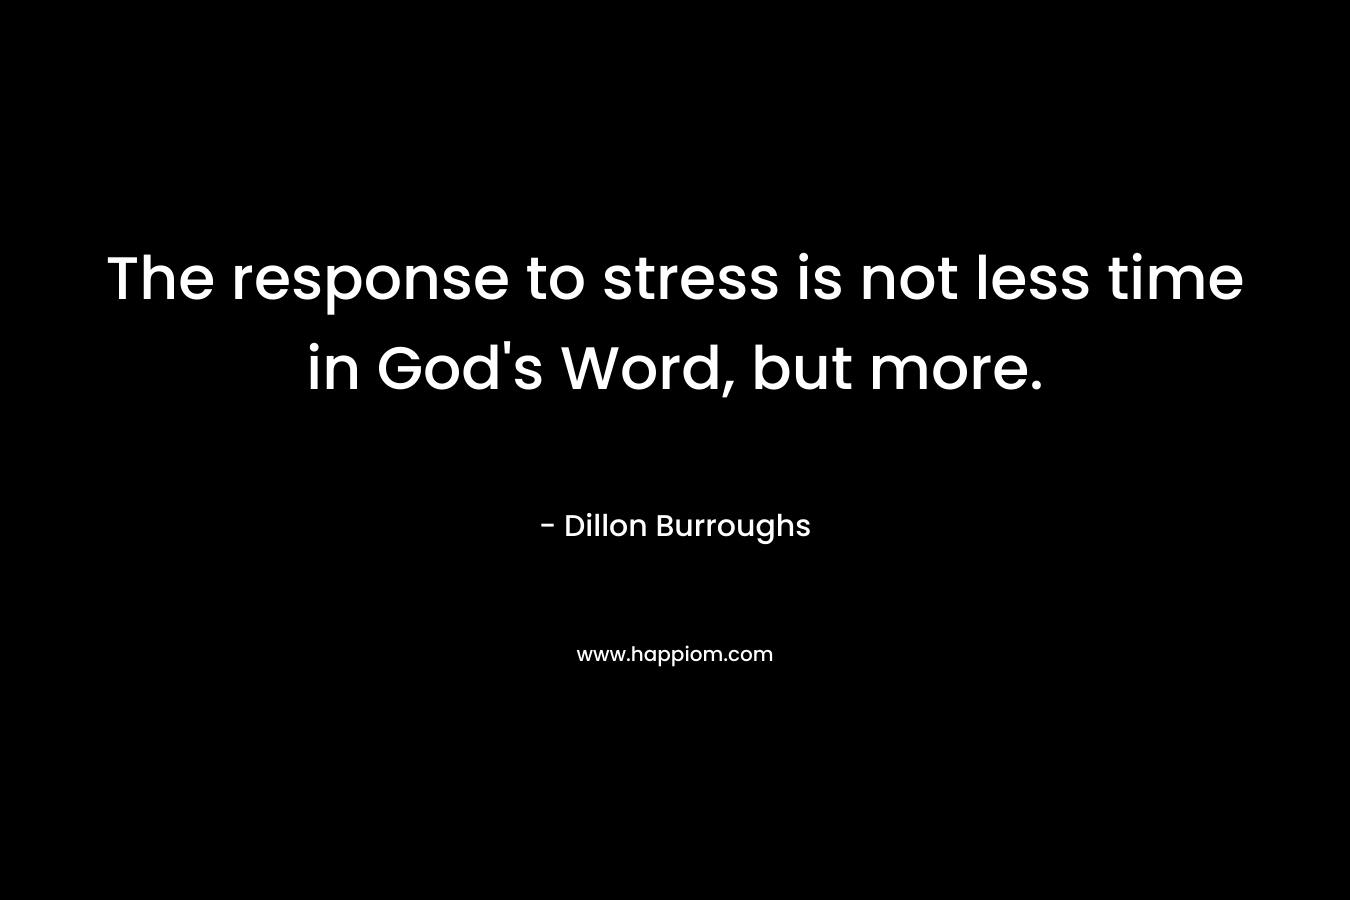 The response to stress is not less time in God's Word, but more.